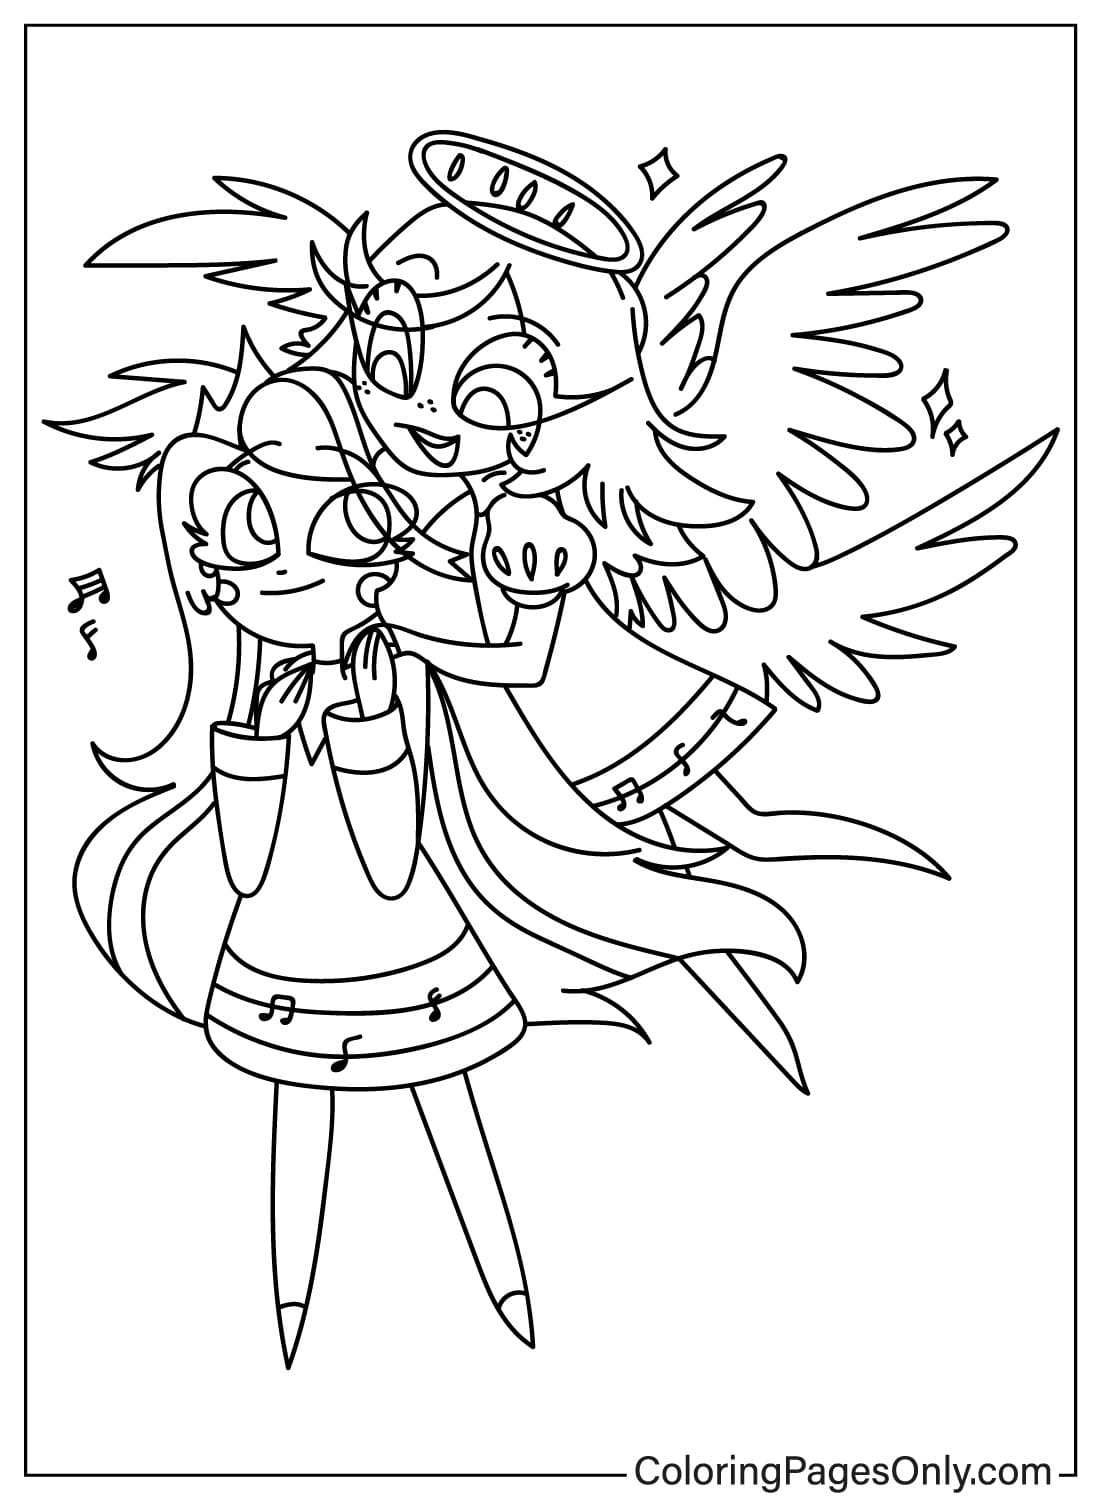 Emily and Charlie Morningstar Coloring Page from Hazbin Hotel